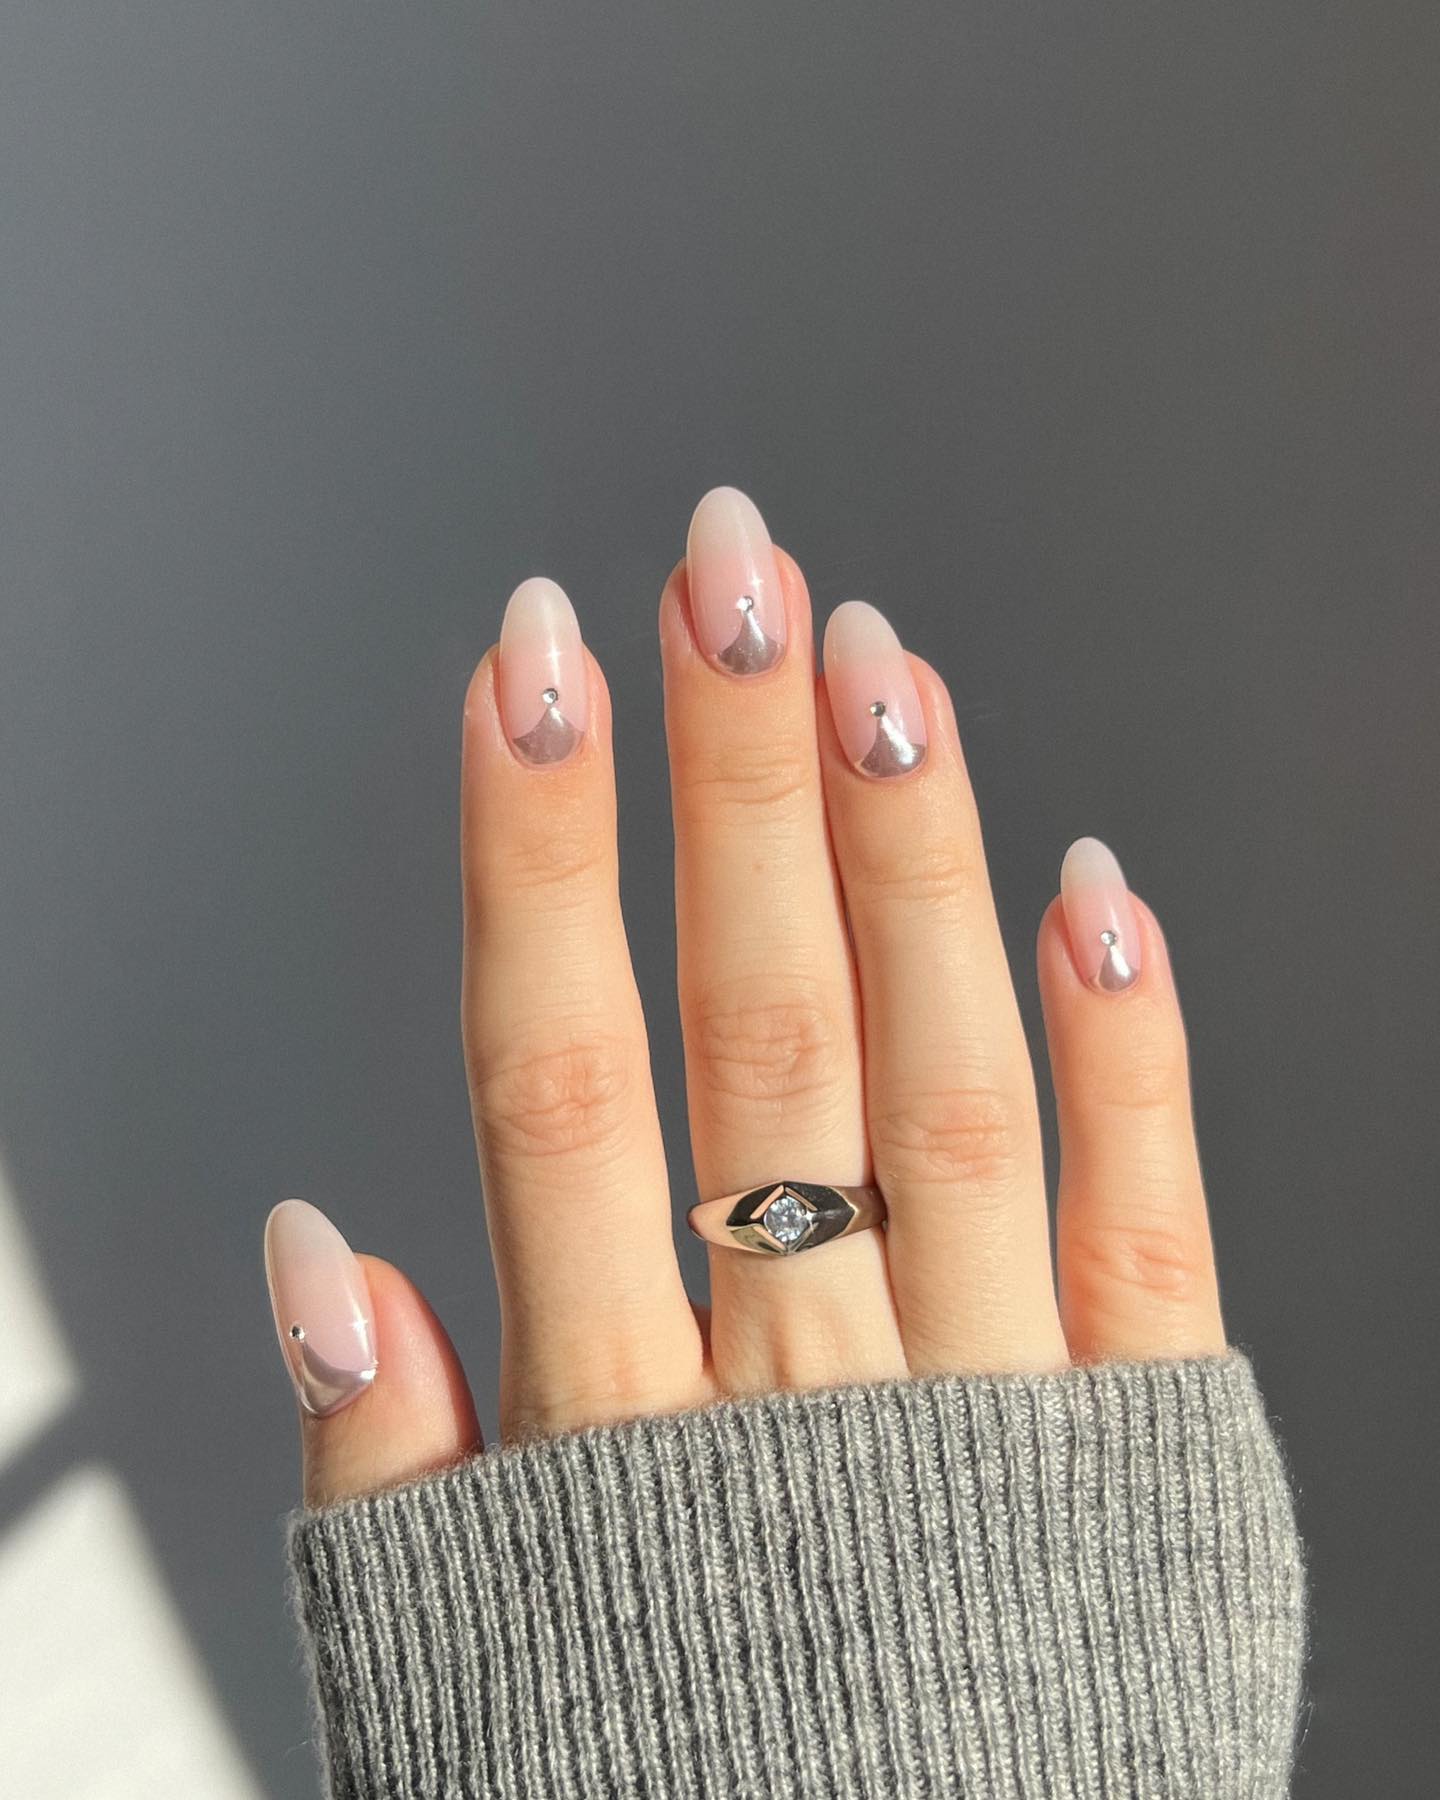 100+ Best Winter Nail Ideas And Designs To Try images 24